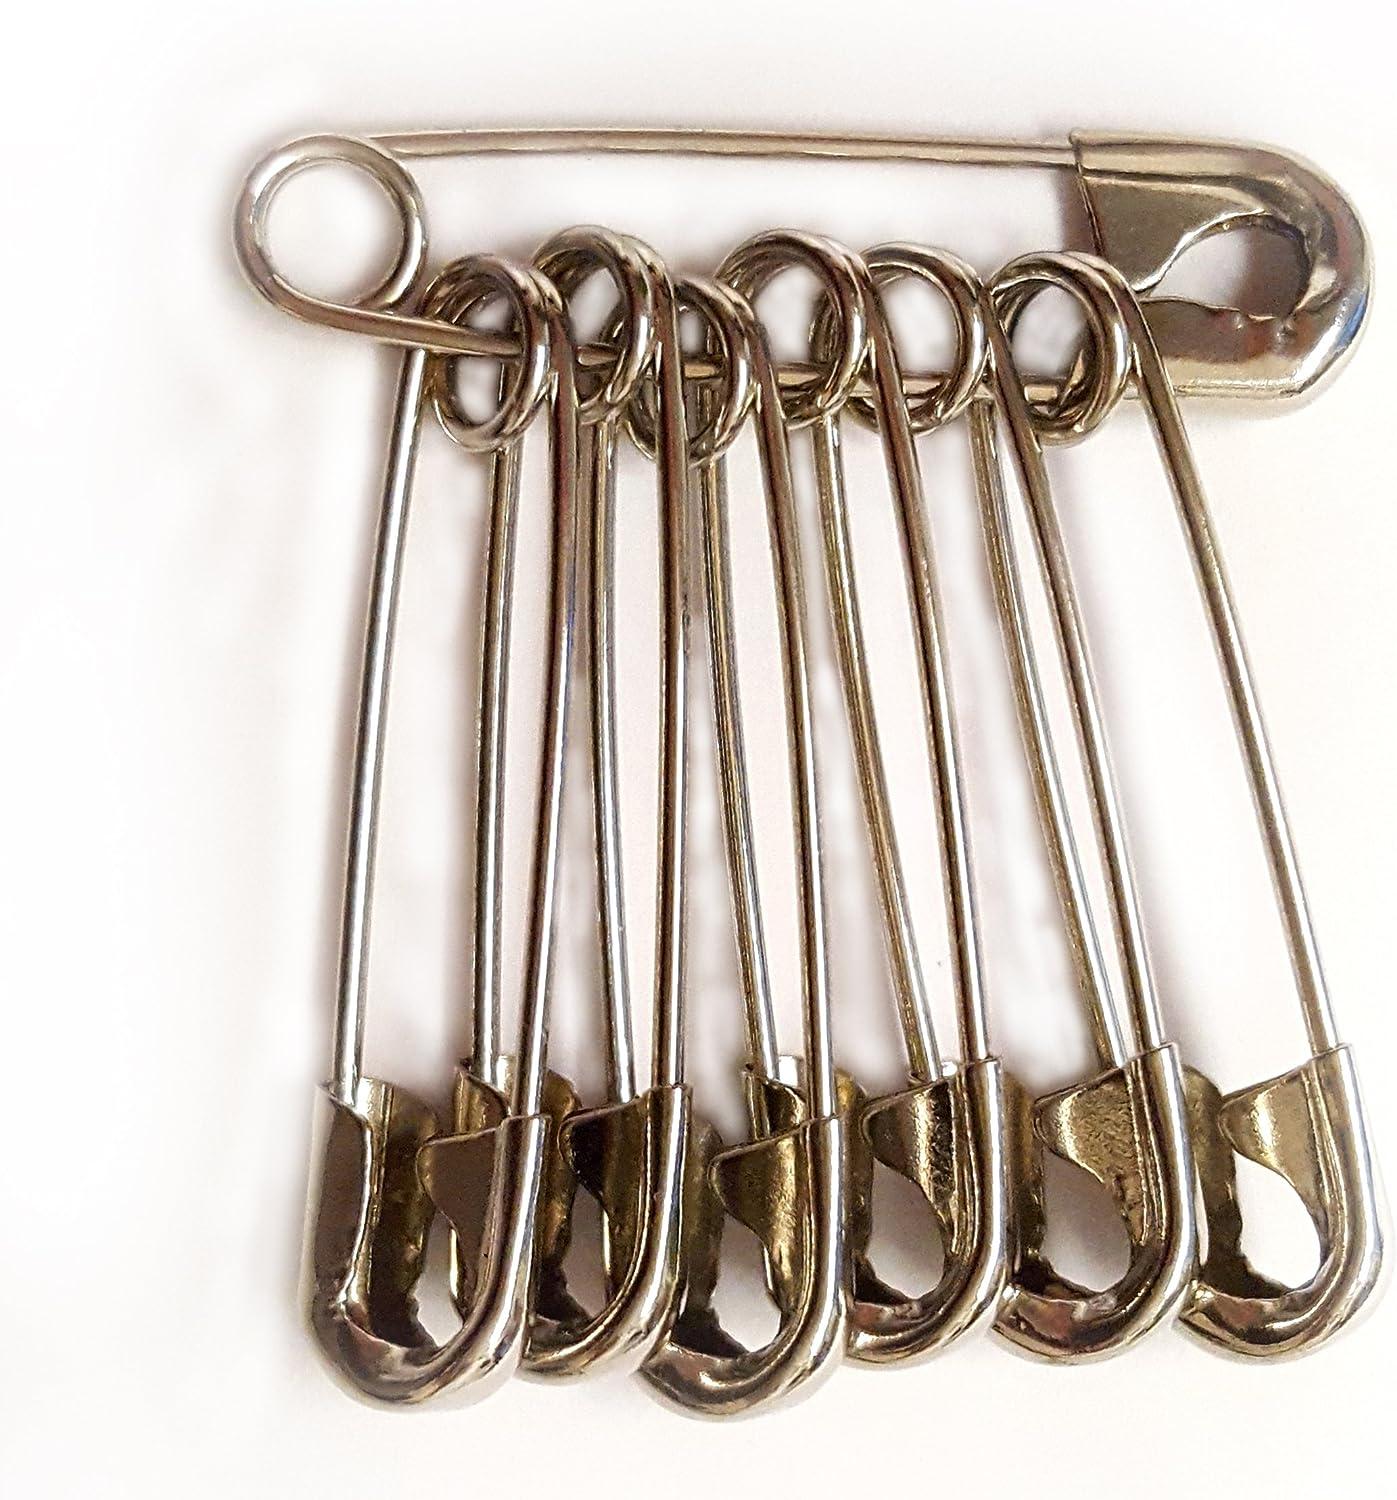  NiftyPlaza Extra Large 2 inch Safety Pins - Heavy Duty Large  Safety Pins, Silver Safety Pins, Safety Pin 2 inch, 2 inch Safety pins  Bulk, Diapers, Laundry, Hijab Rust Resistant (100 Safety Pins)